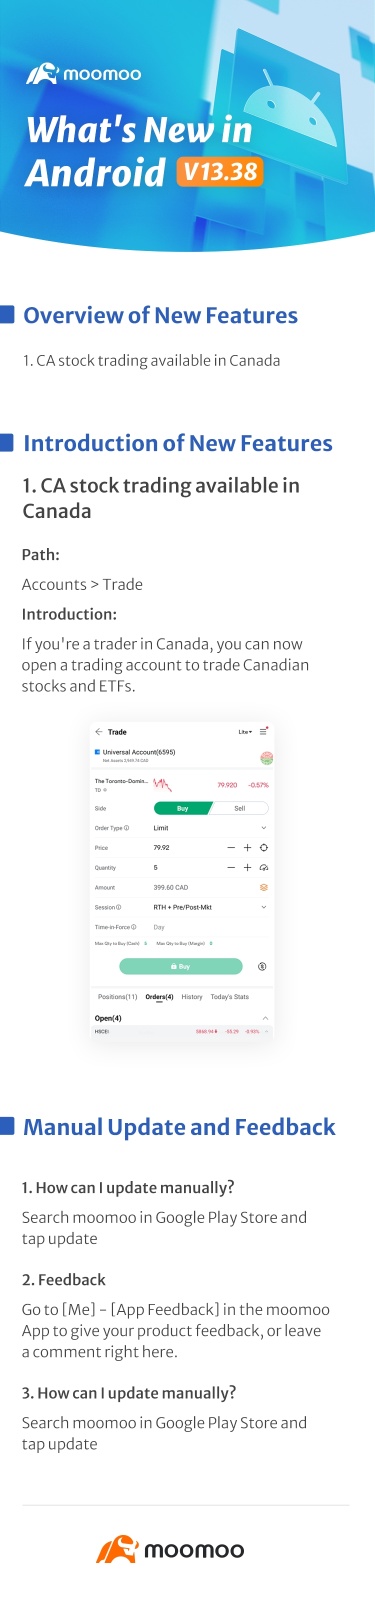 What's New: CA stock trading available in Canada in Android v13.38